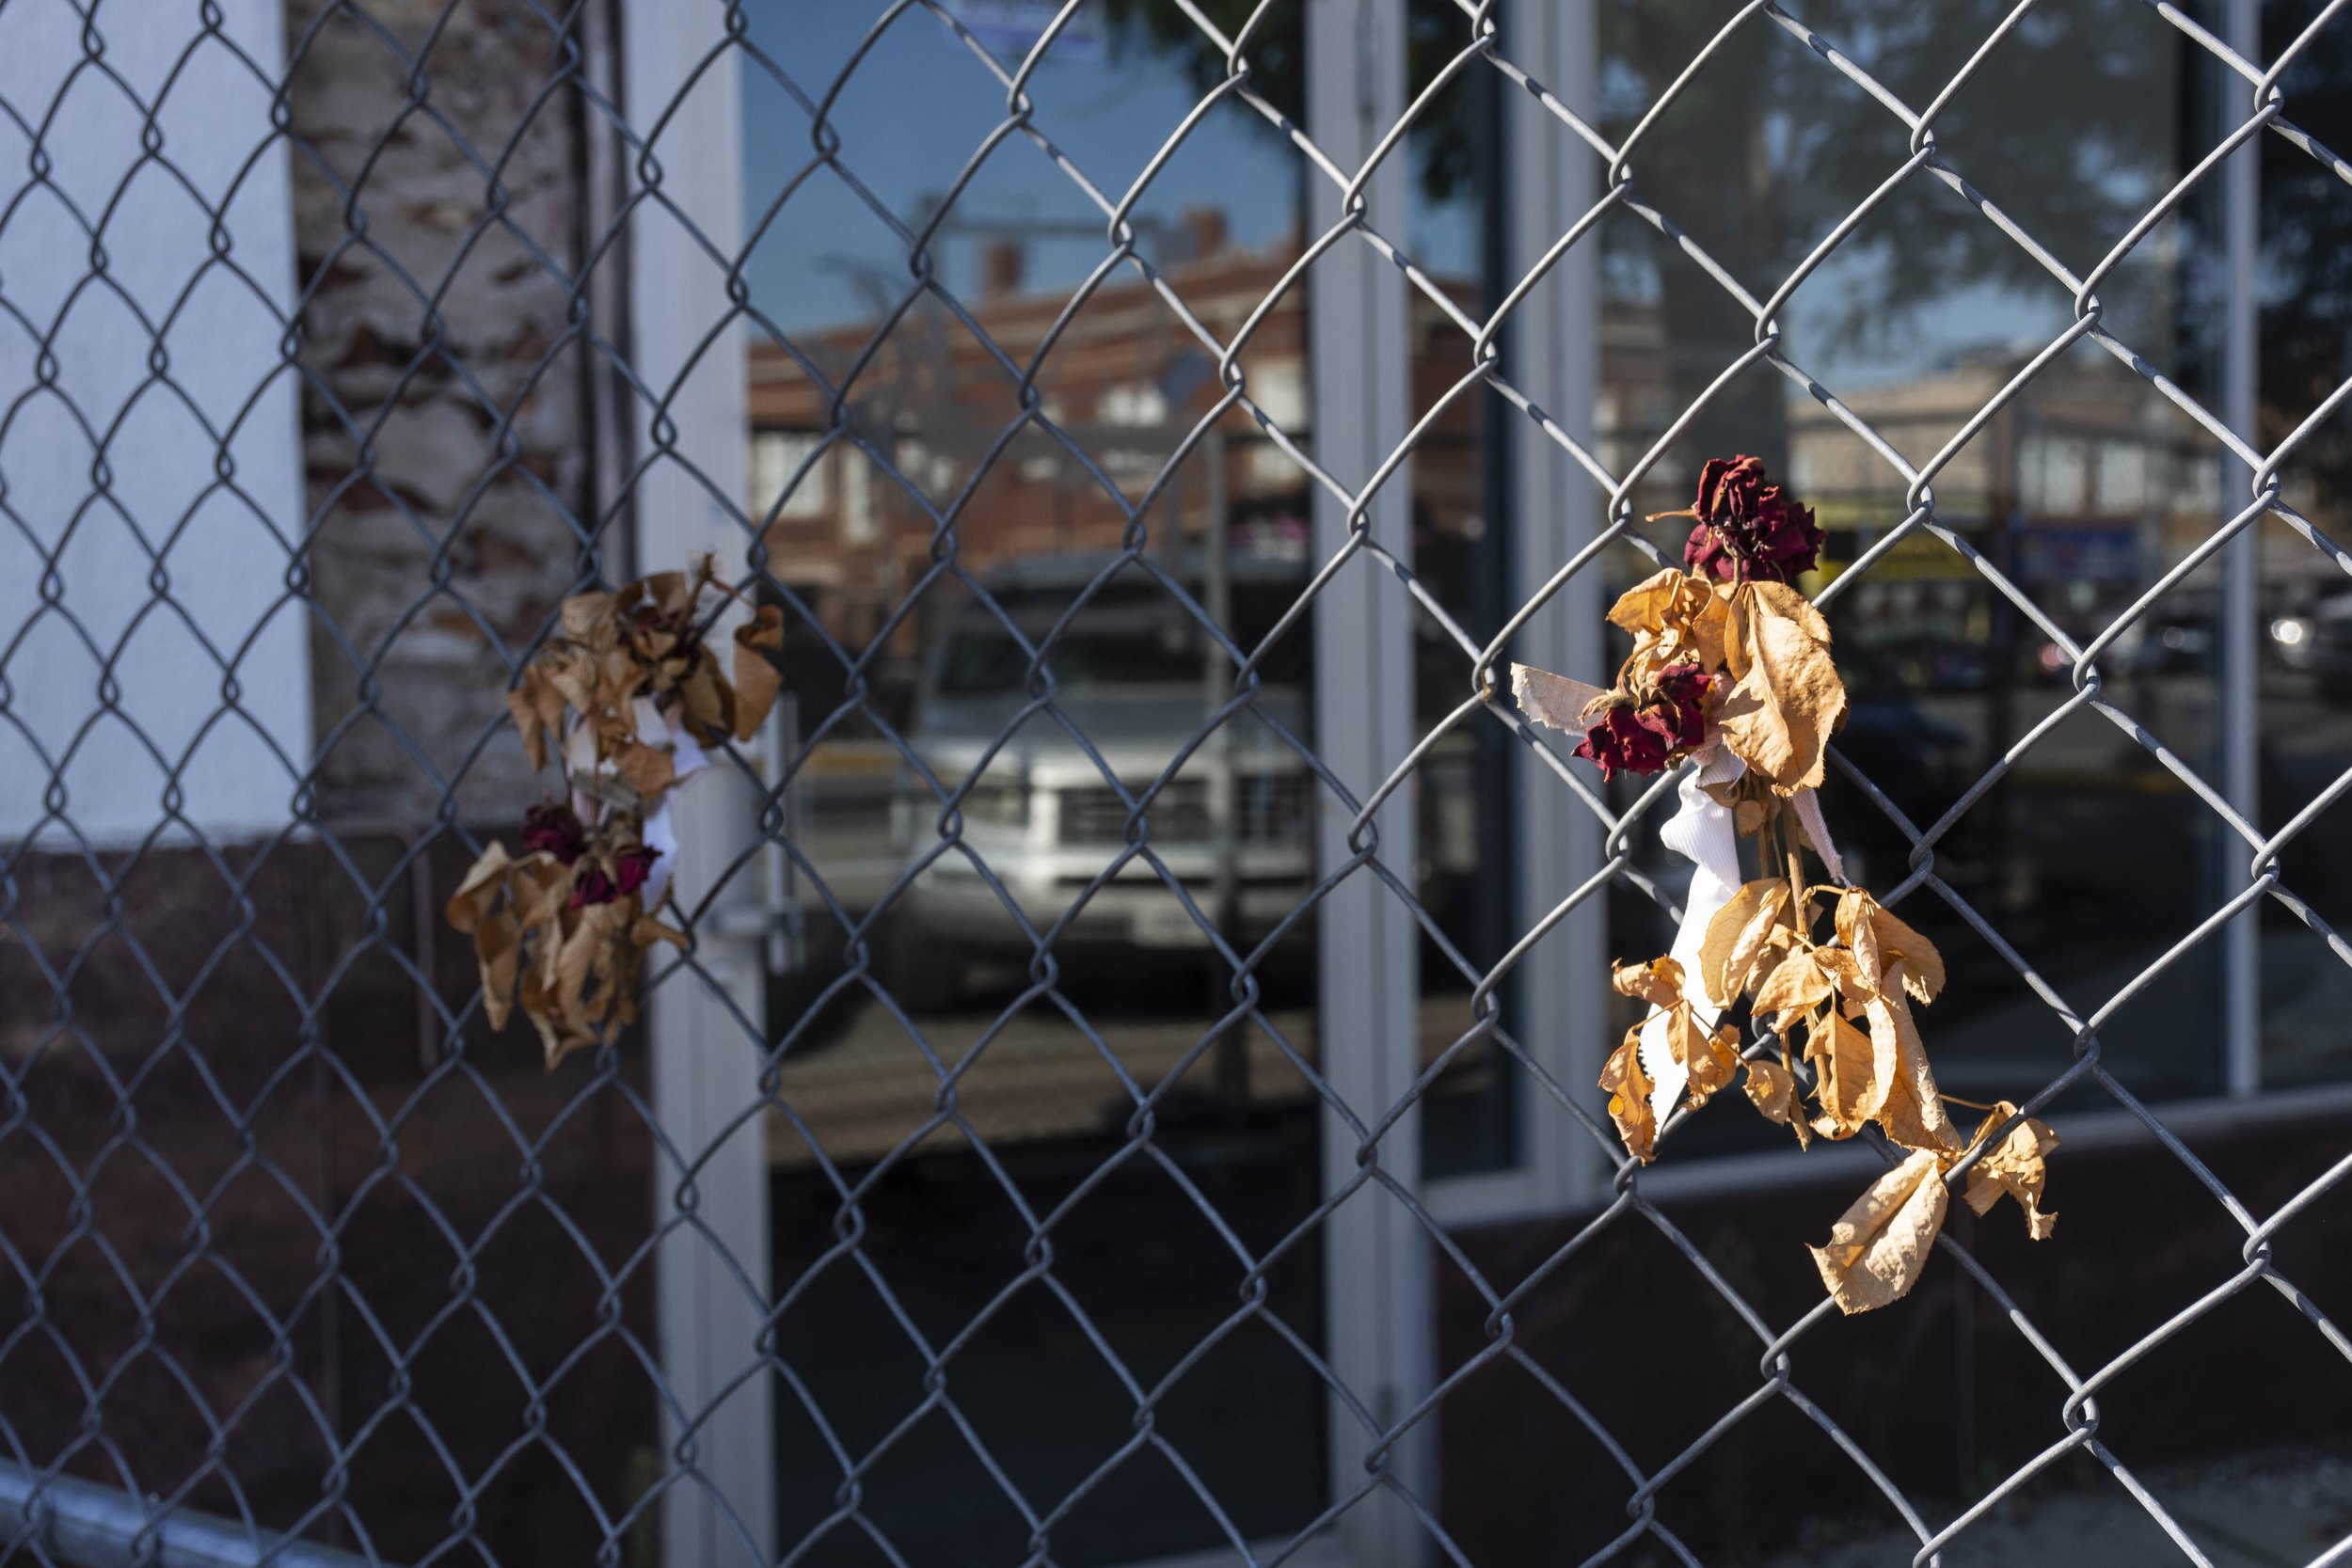  Señora Carmen left a sign near a fenced-up and vacant building near 58th Ct. / Cermak Rd., apologizing for trespassing so she can pick up the piled-up trash. She also left behind flowers. The sign was taken down but the flowers remained on the fence